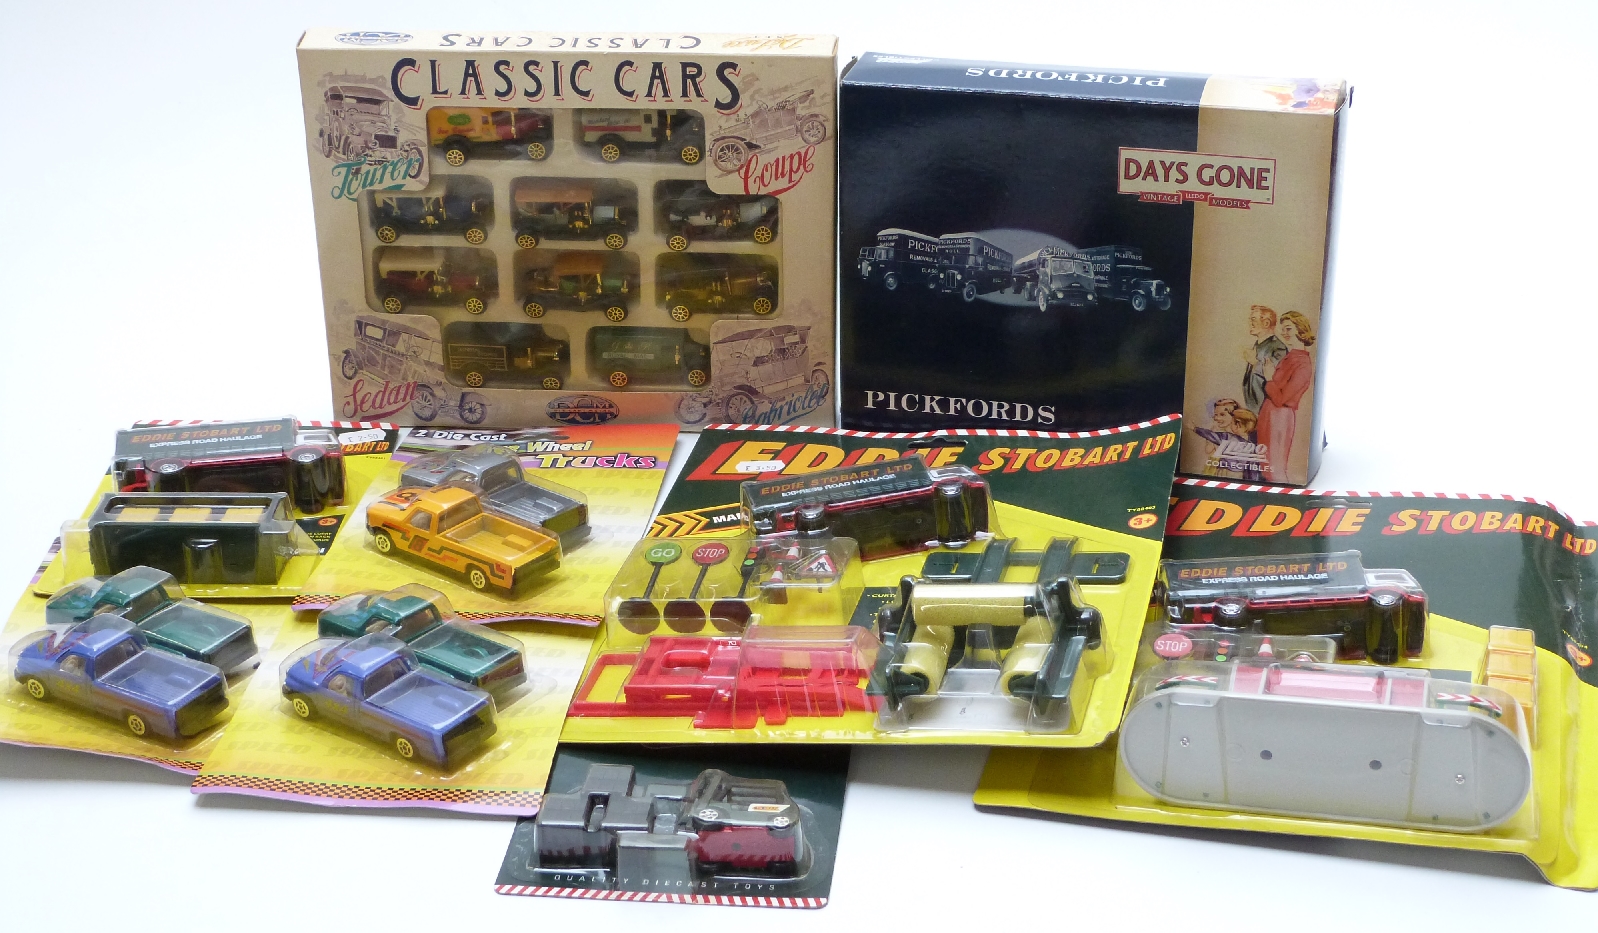 Forty-one Lledo, Corgi, Matchbox Models of Yesteryear and similar diecast model vehicles including